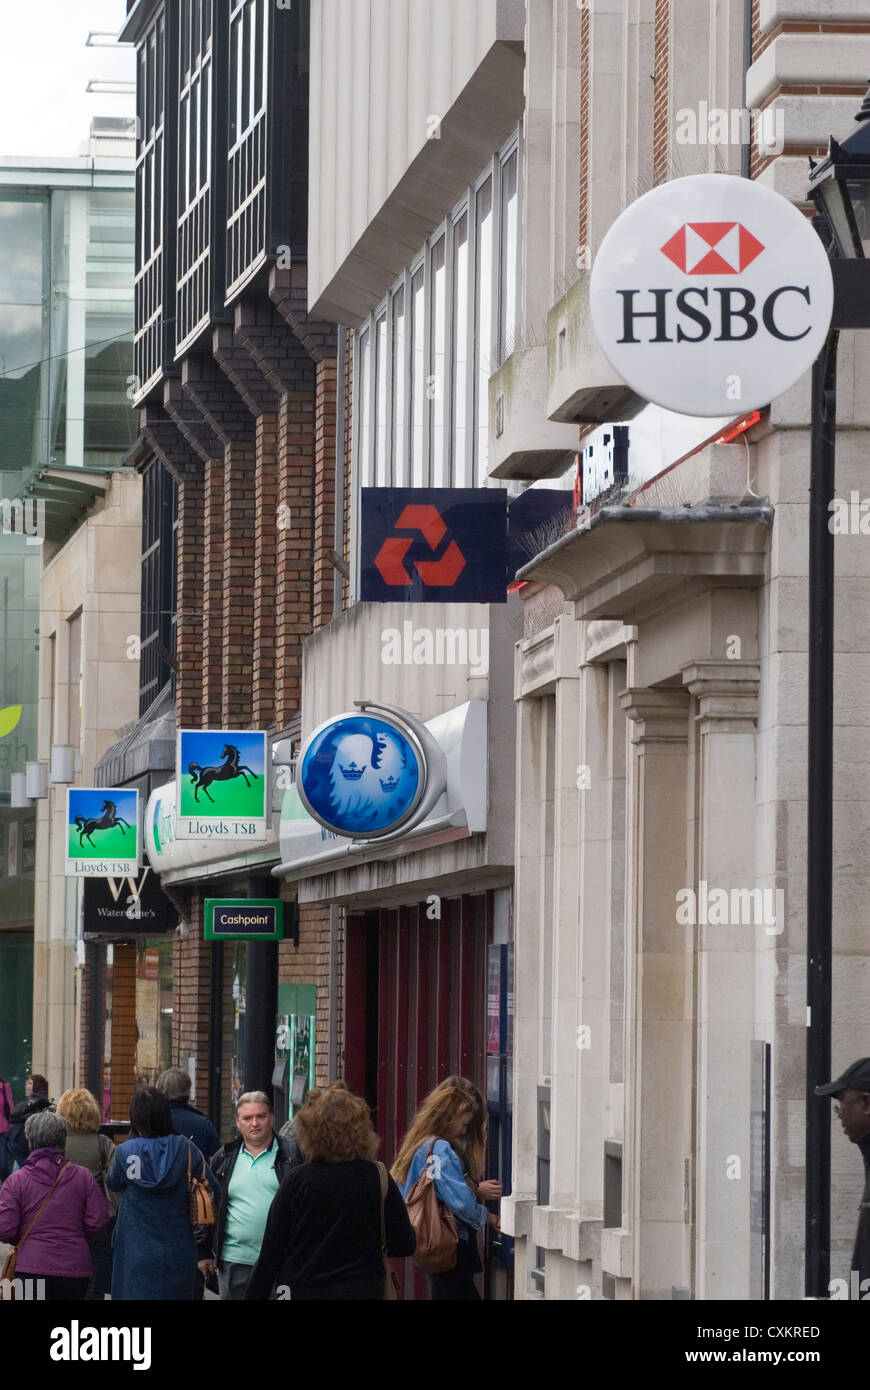 High Street Banks signs home counties UK 2007.  2000s people shopping in the high street, woman using a cash point when there were still banks in a local High Street. HSBC, Nat West, National Westminster Bank,  Barclays,  Lloyds, TSB, and a  Cashpoint HOMER SYKES Stock Photo